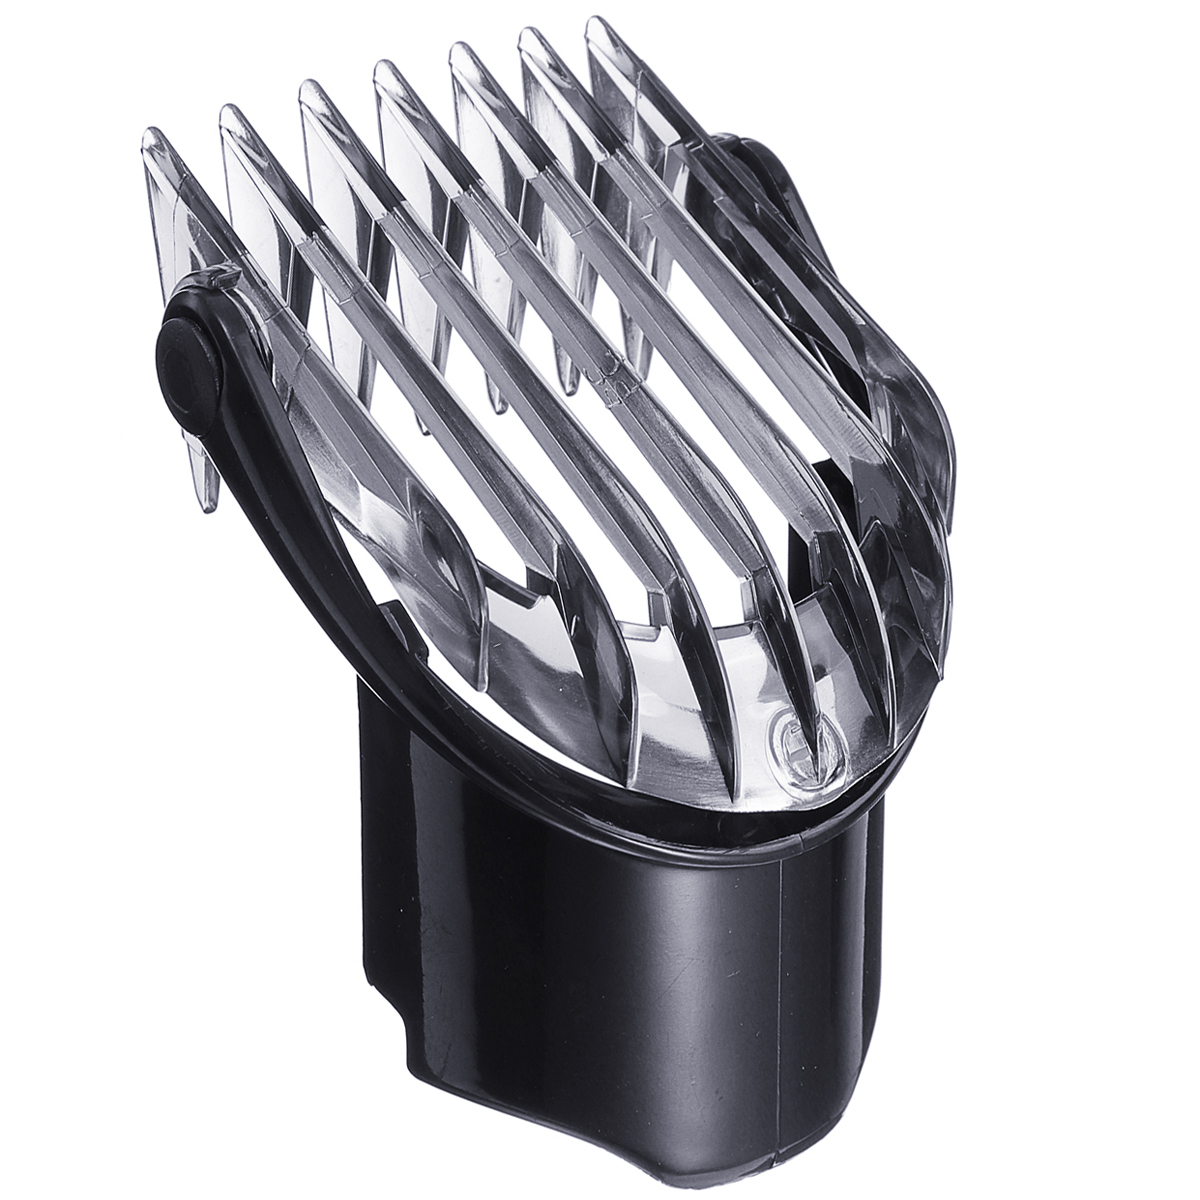 Hair-Clipper-Guide-Comb-3-21mm-Electric-Trimmer-Comb-Replacements-for-Philips-1400757